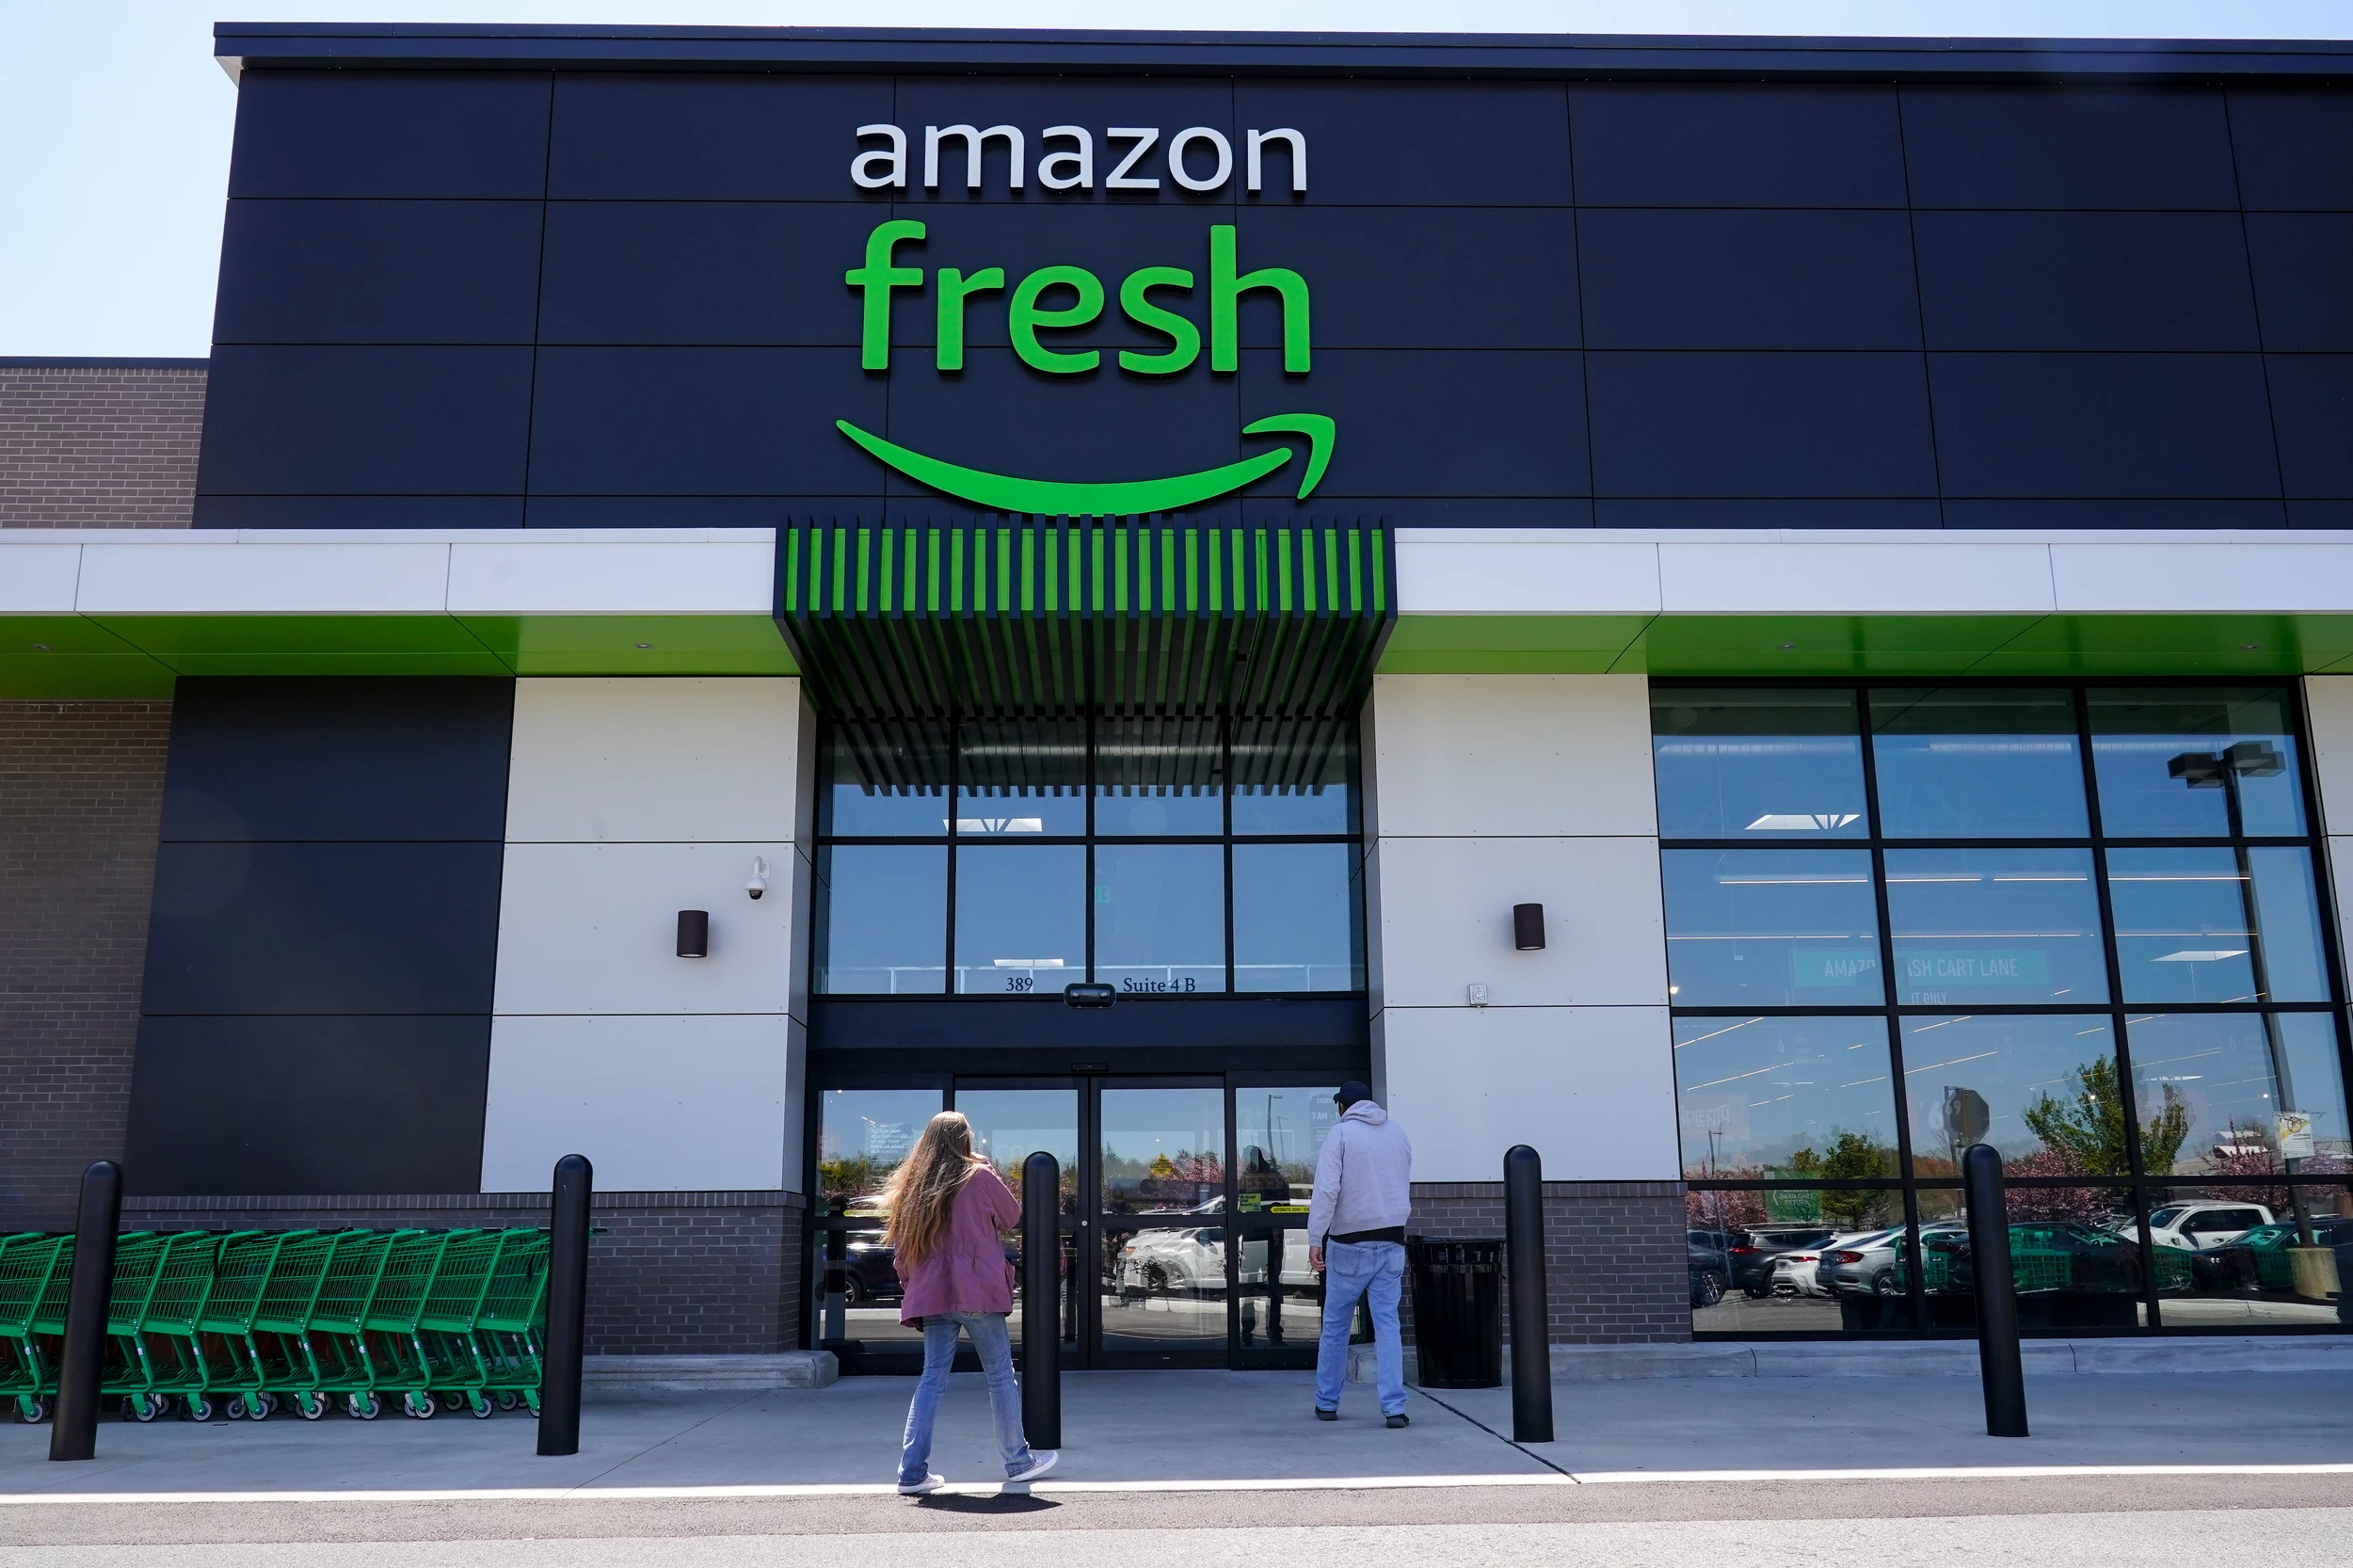 Amazon Fresh is finally coming to NJ, and they're hiring